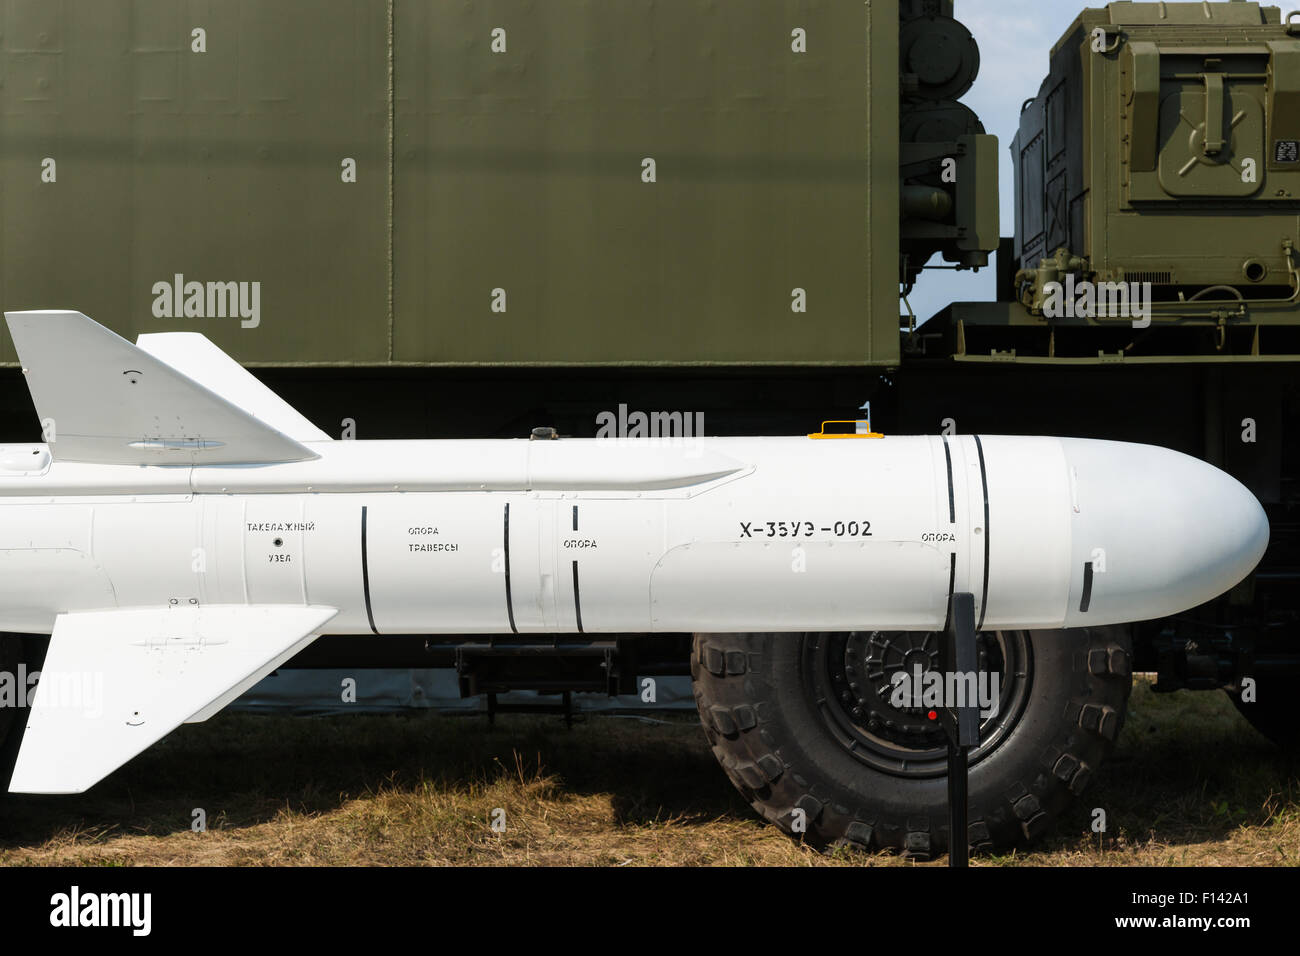 Moscow, Russia, Wednesday, August 26, 2015. The Twelfth International Moscow Aerospace Show MAKS 2015 was opened in Zhukovsky city in the Moscow Region on August 25, 2015. The aim of the show is to demonstrate Russian aerospace achievements, make contracts and negotiate international projects. Details of the launching vehicle and a missile of the shore-based Bal anti ship missile system on display at the air show. Credit:  Alex's Pictures/Alamy Live News Stock Photo